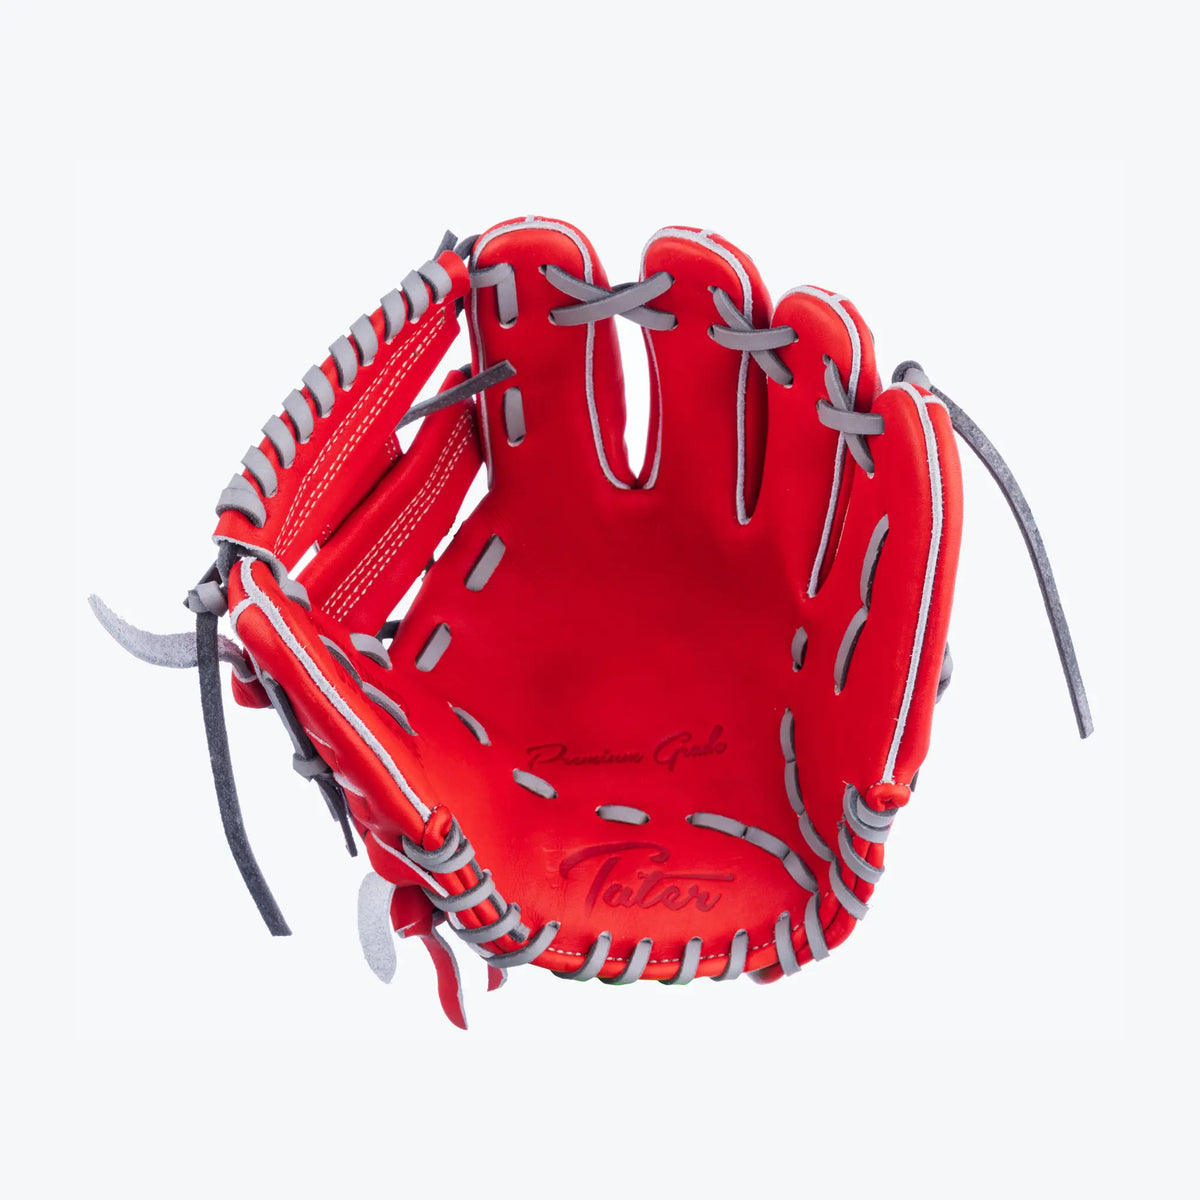 Vibrant red and grey Tater Baseball infielder training glove, 9-inch size, showcasing inside view with signature ‘Precision Grip’ for right-hand throwers.